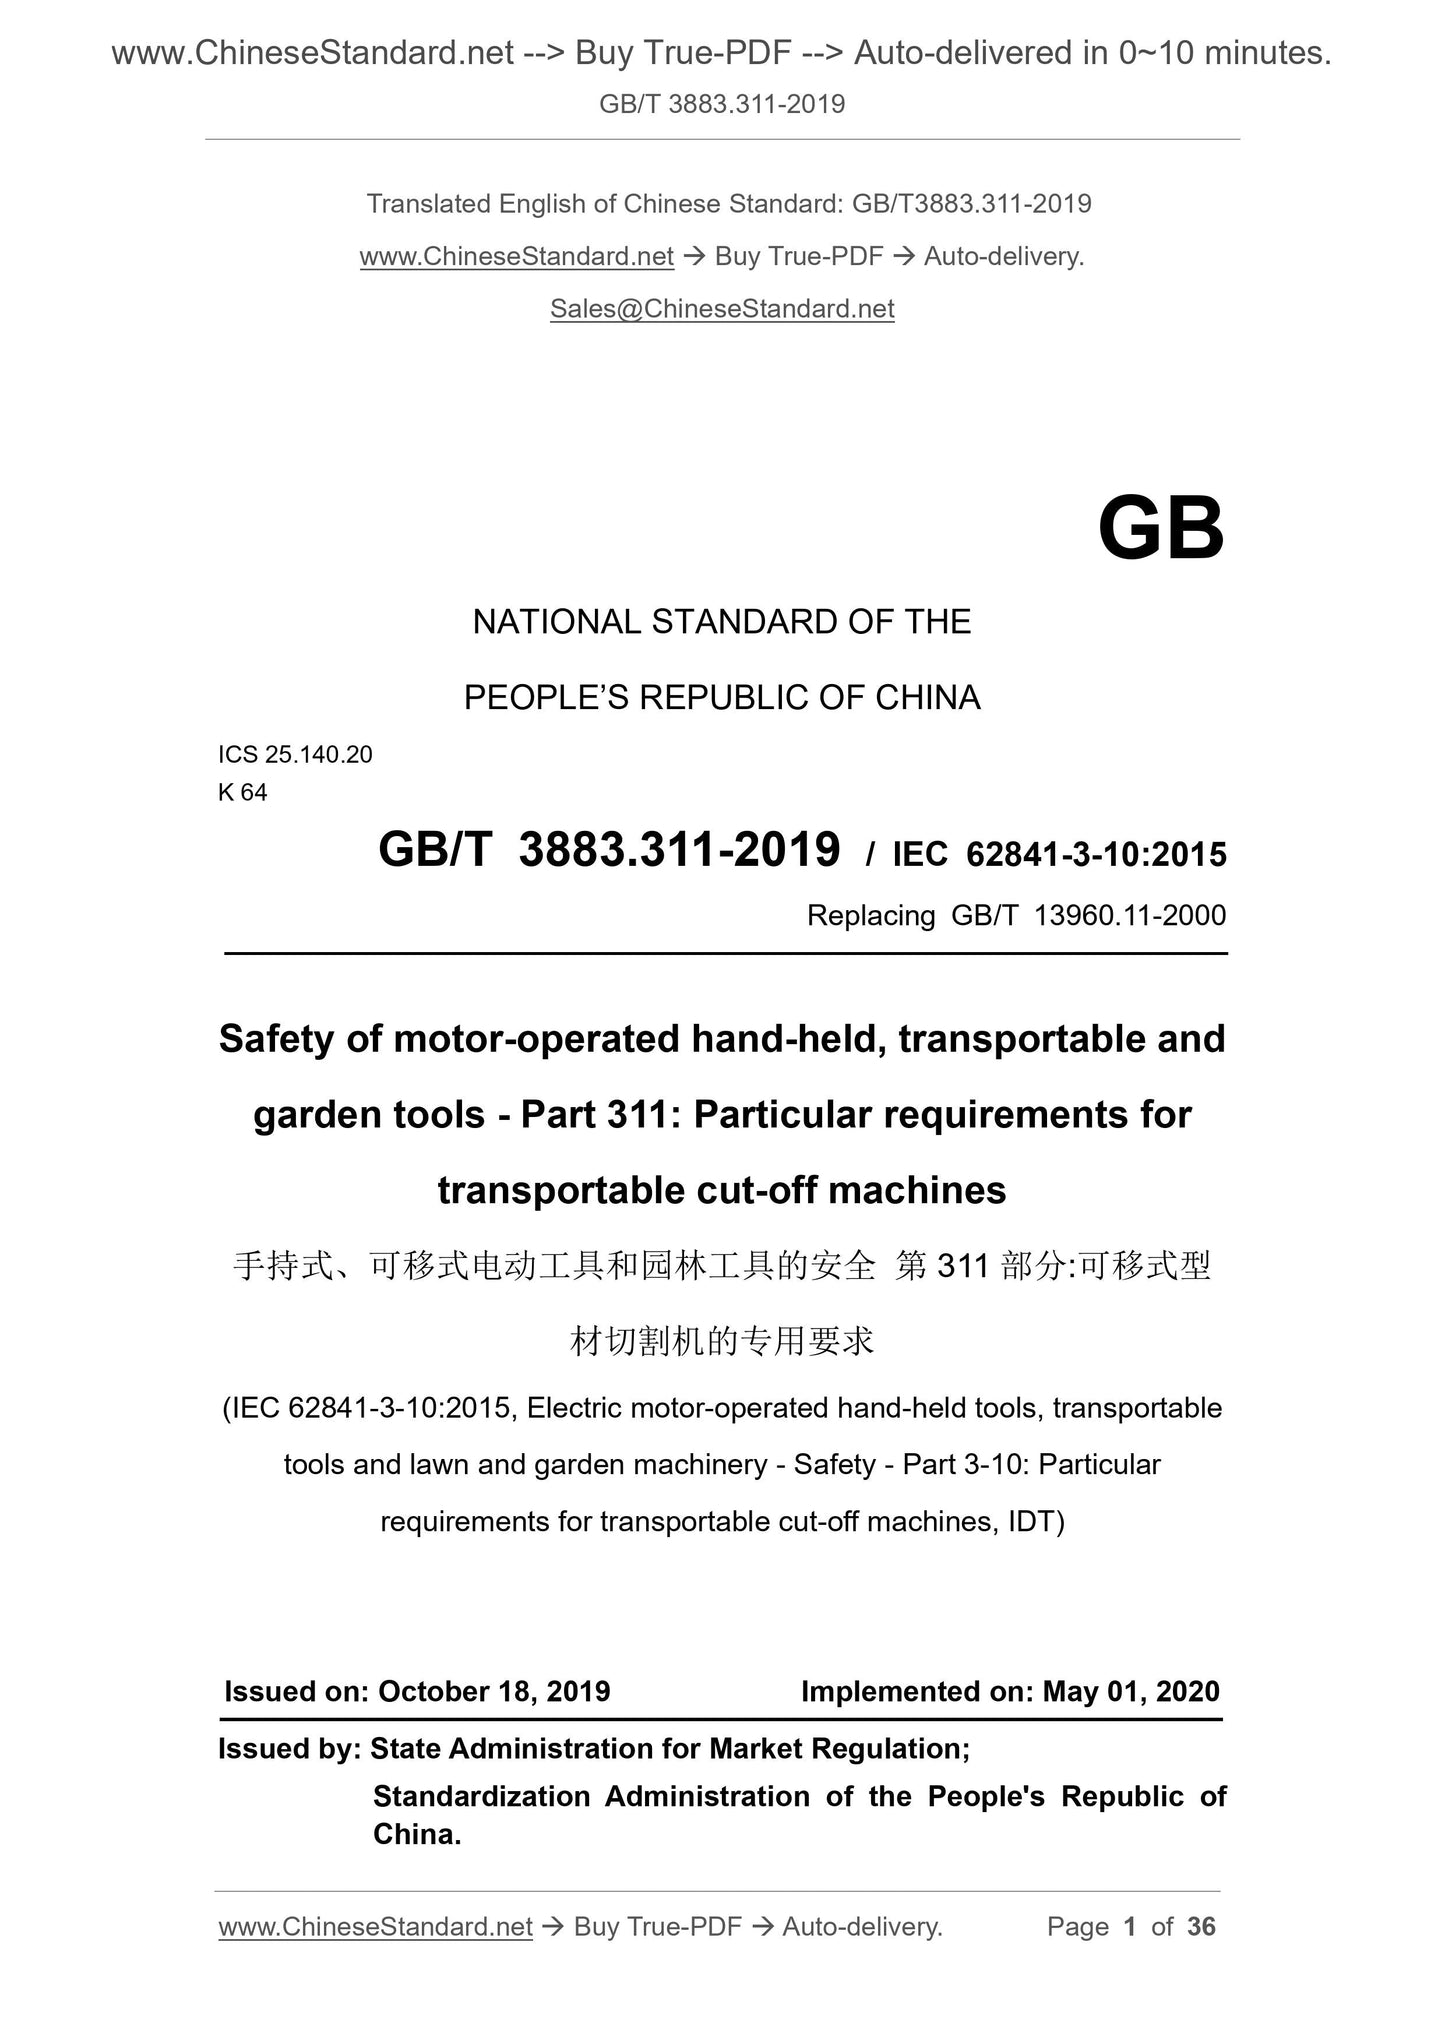 GB/T 3883.311-2019 Page 1